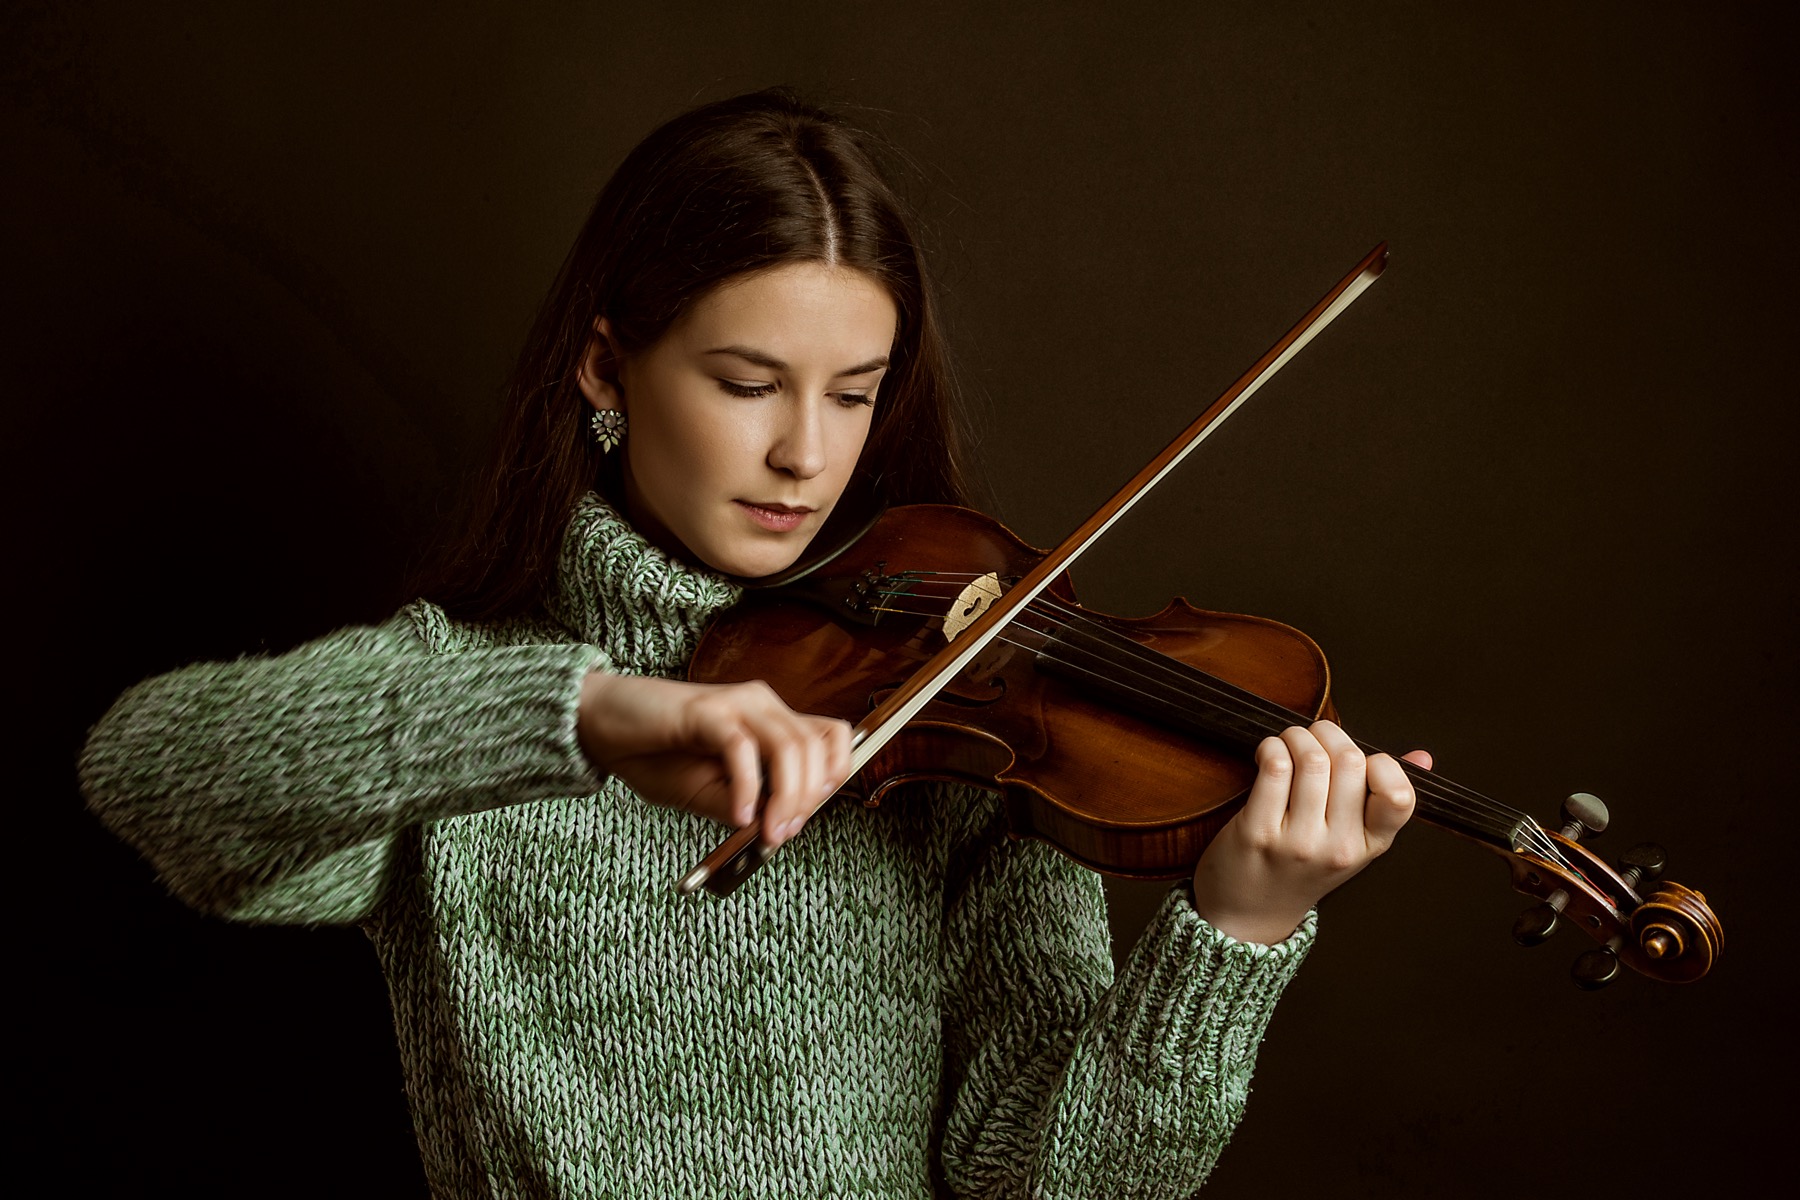 Young woman in green sweater playing violin with bow arm moving